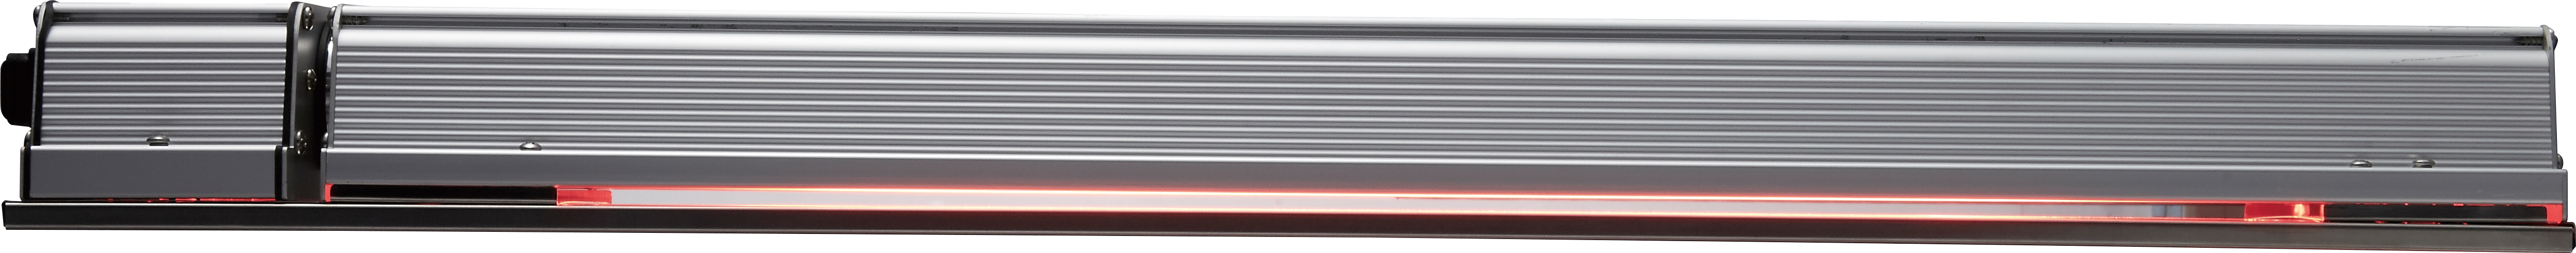 Relax Glass IRA IP 65 Glass Radiant Heater With 1.2 - 2.2 kW